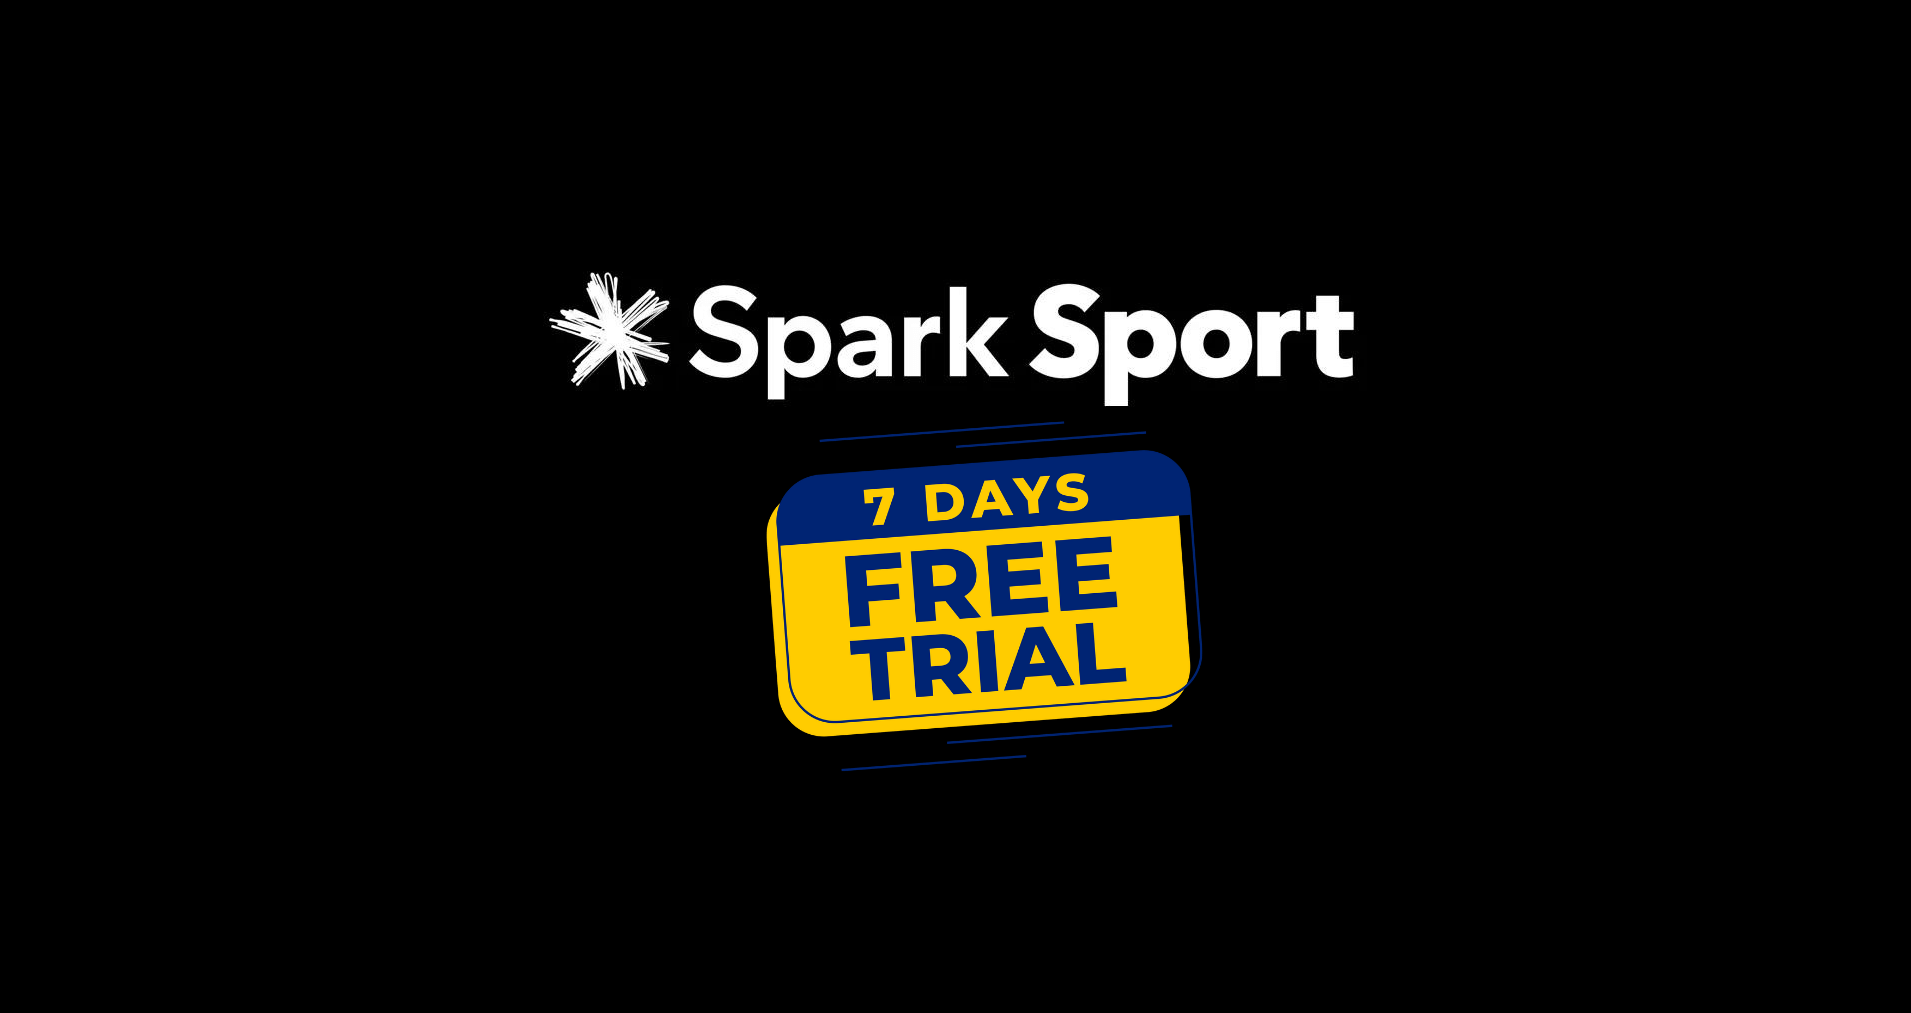 How To Get Spark Sport Free Trial For Days